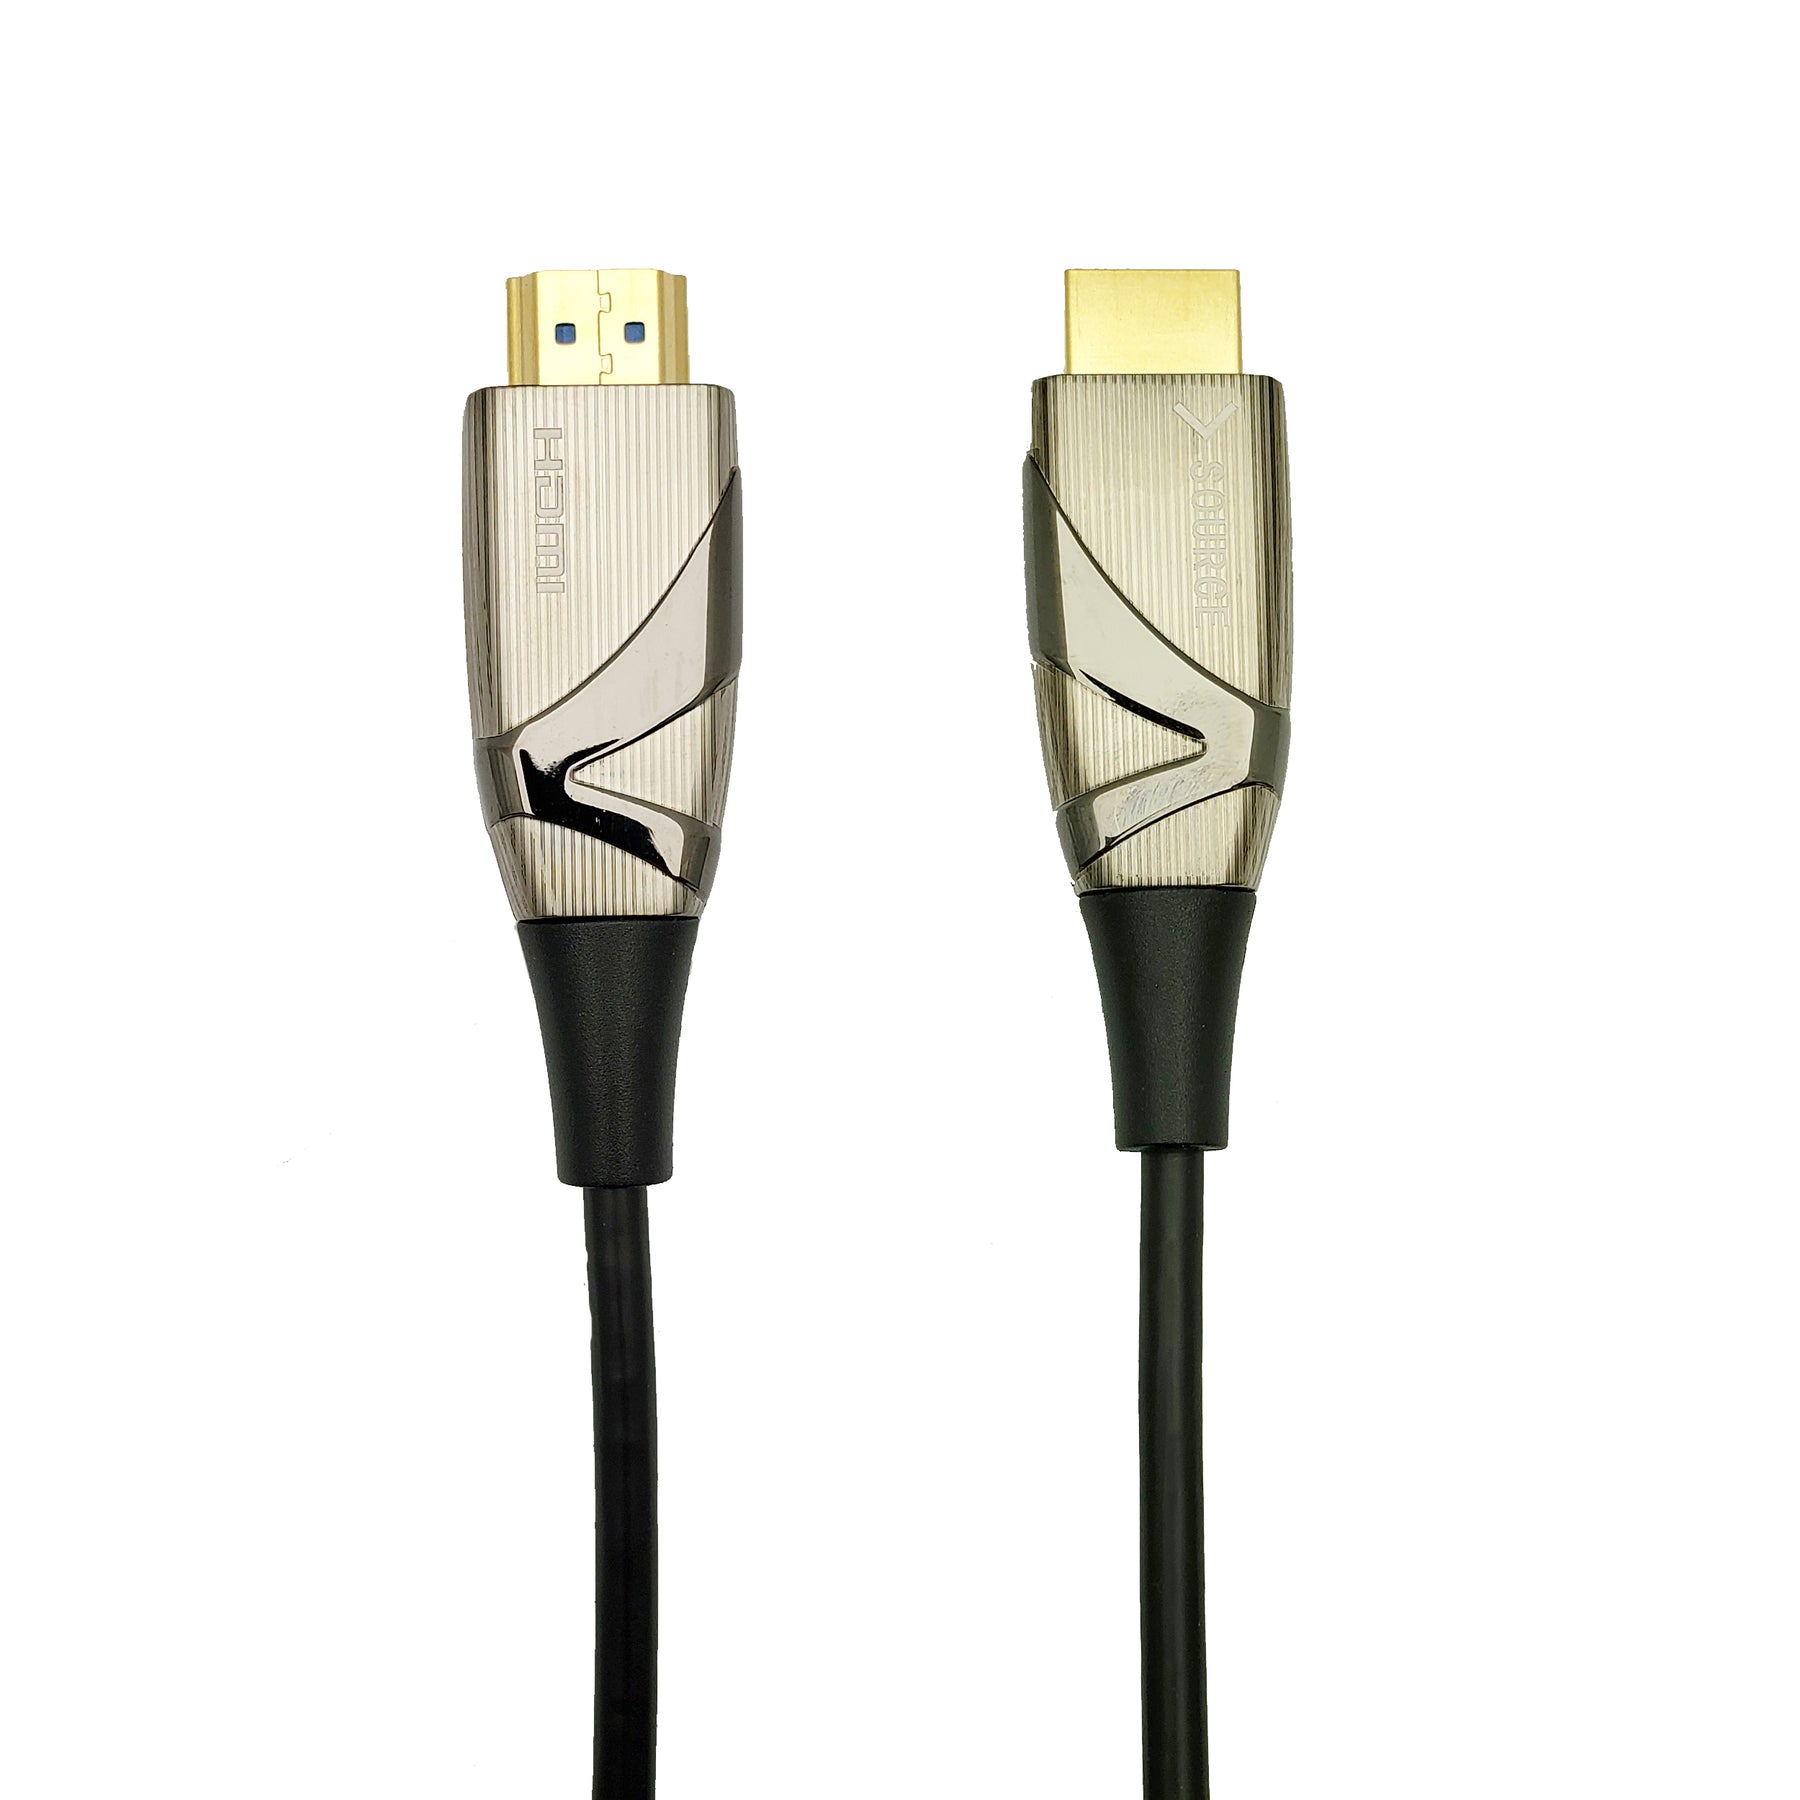 Why use only Conversions Technology HDMI Cables